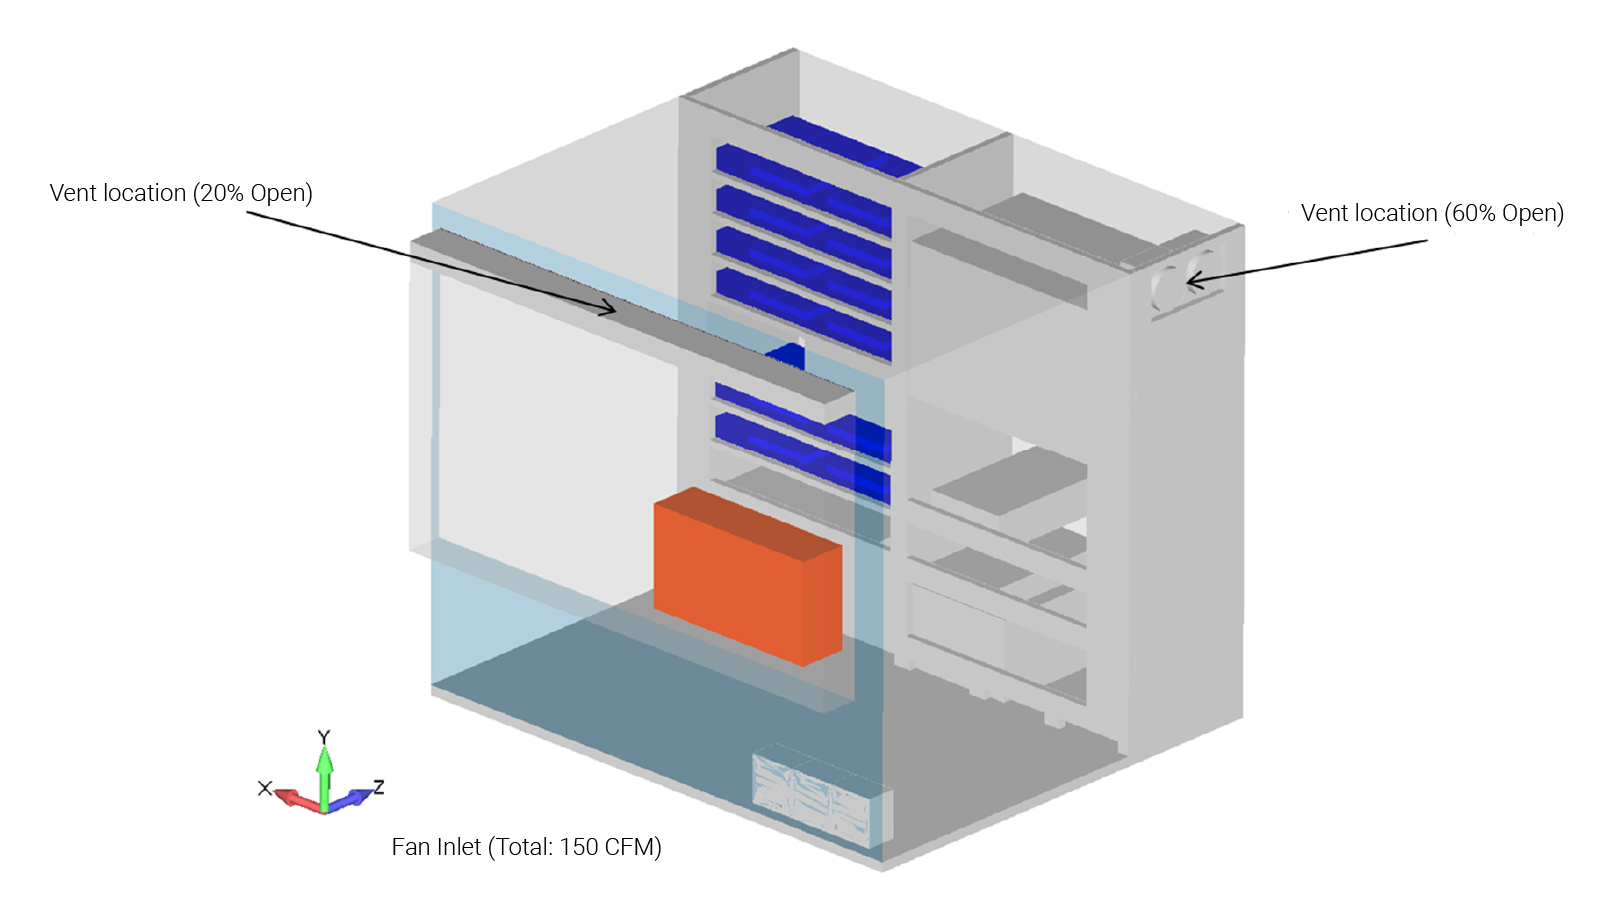 Starting geometry for CFD analysis showing inlets and fan location